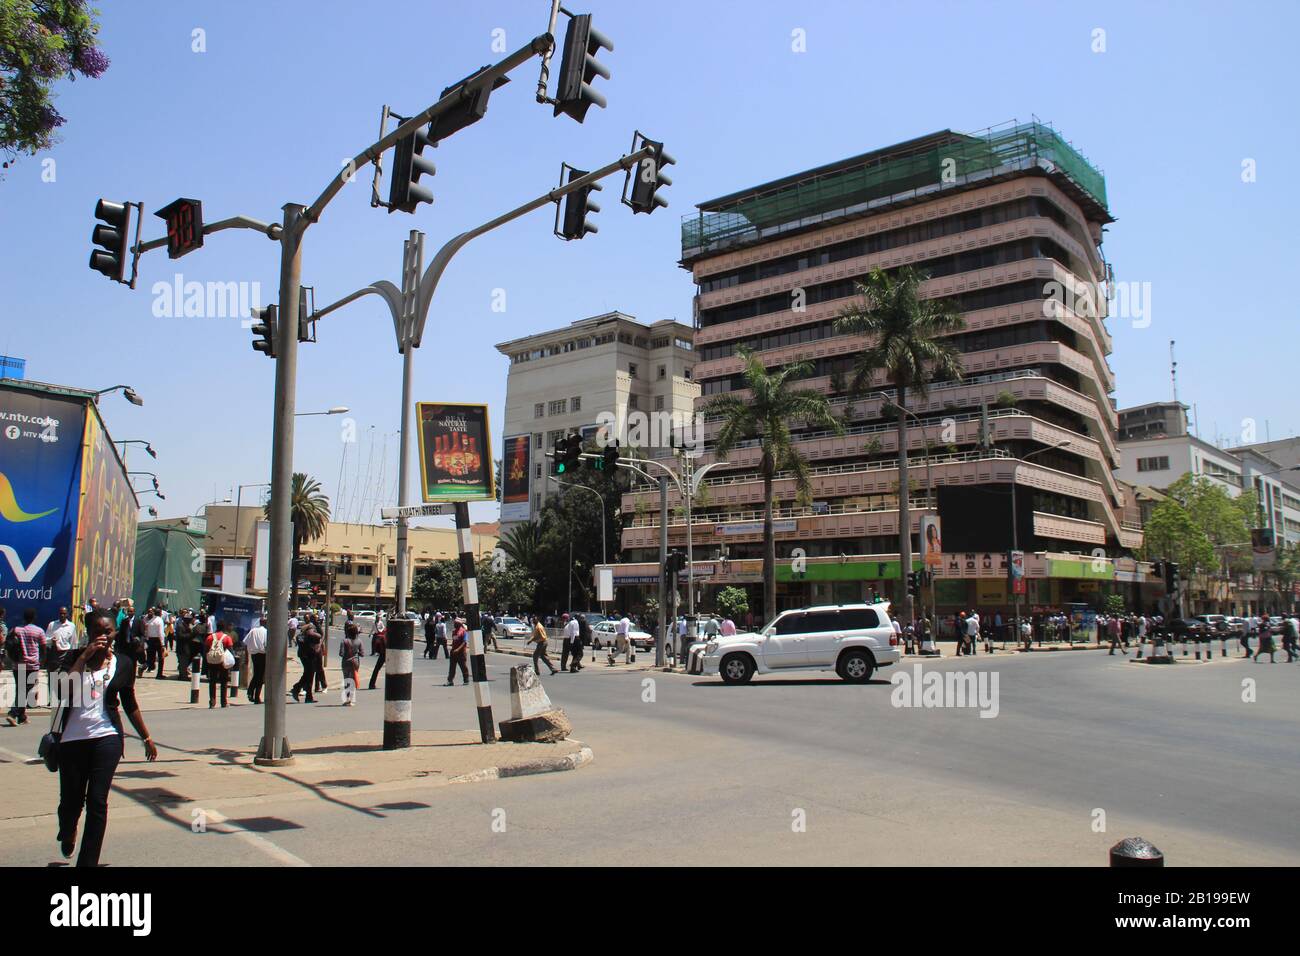 Nairobi, Kenya - January 17, 2015: road in the city center with pedestrians, cars and traffic lights Stock Photo